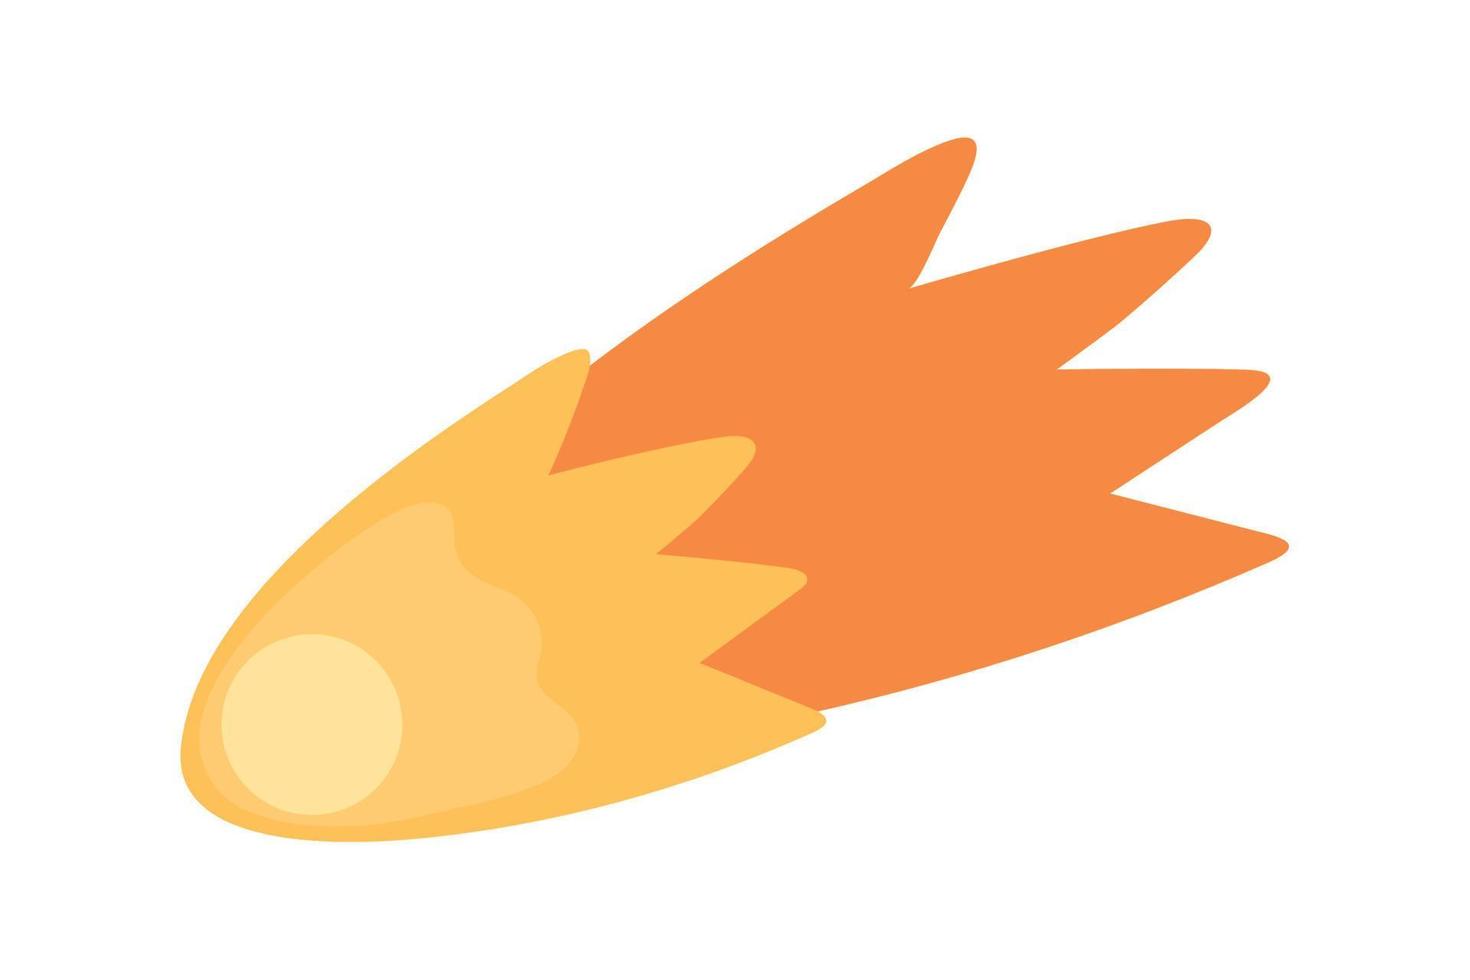 space asteroid icon vector